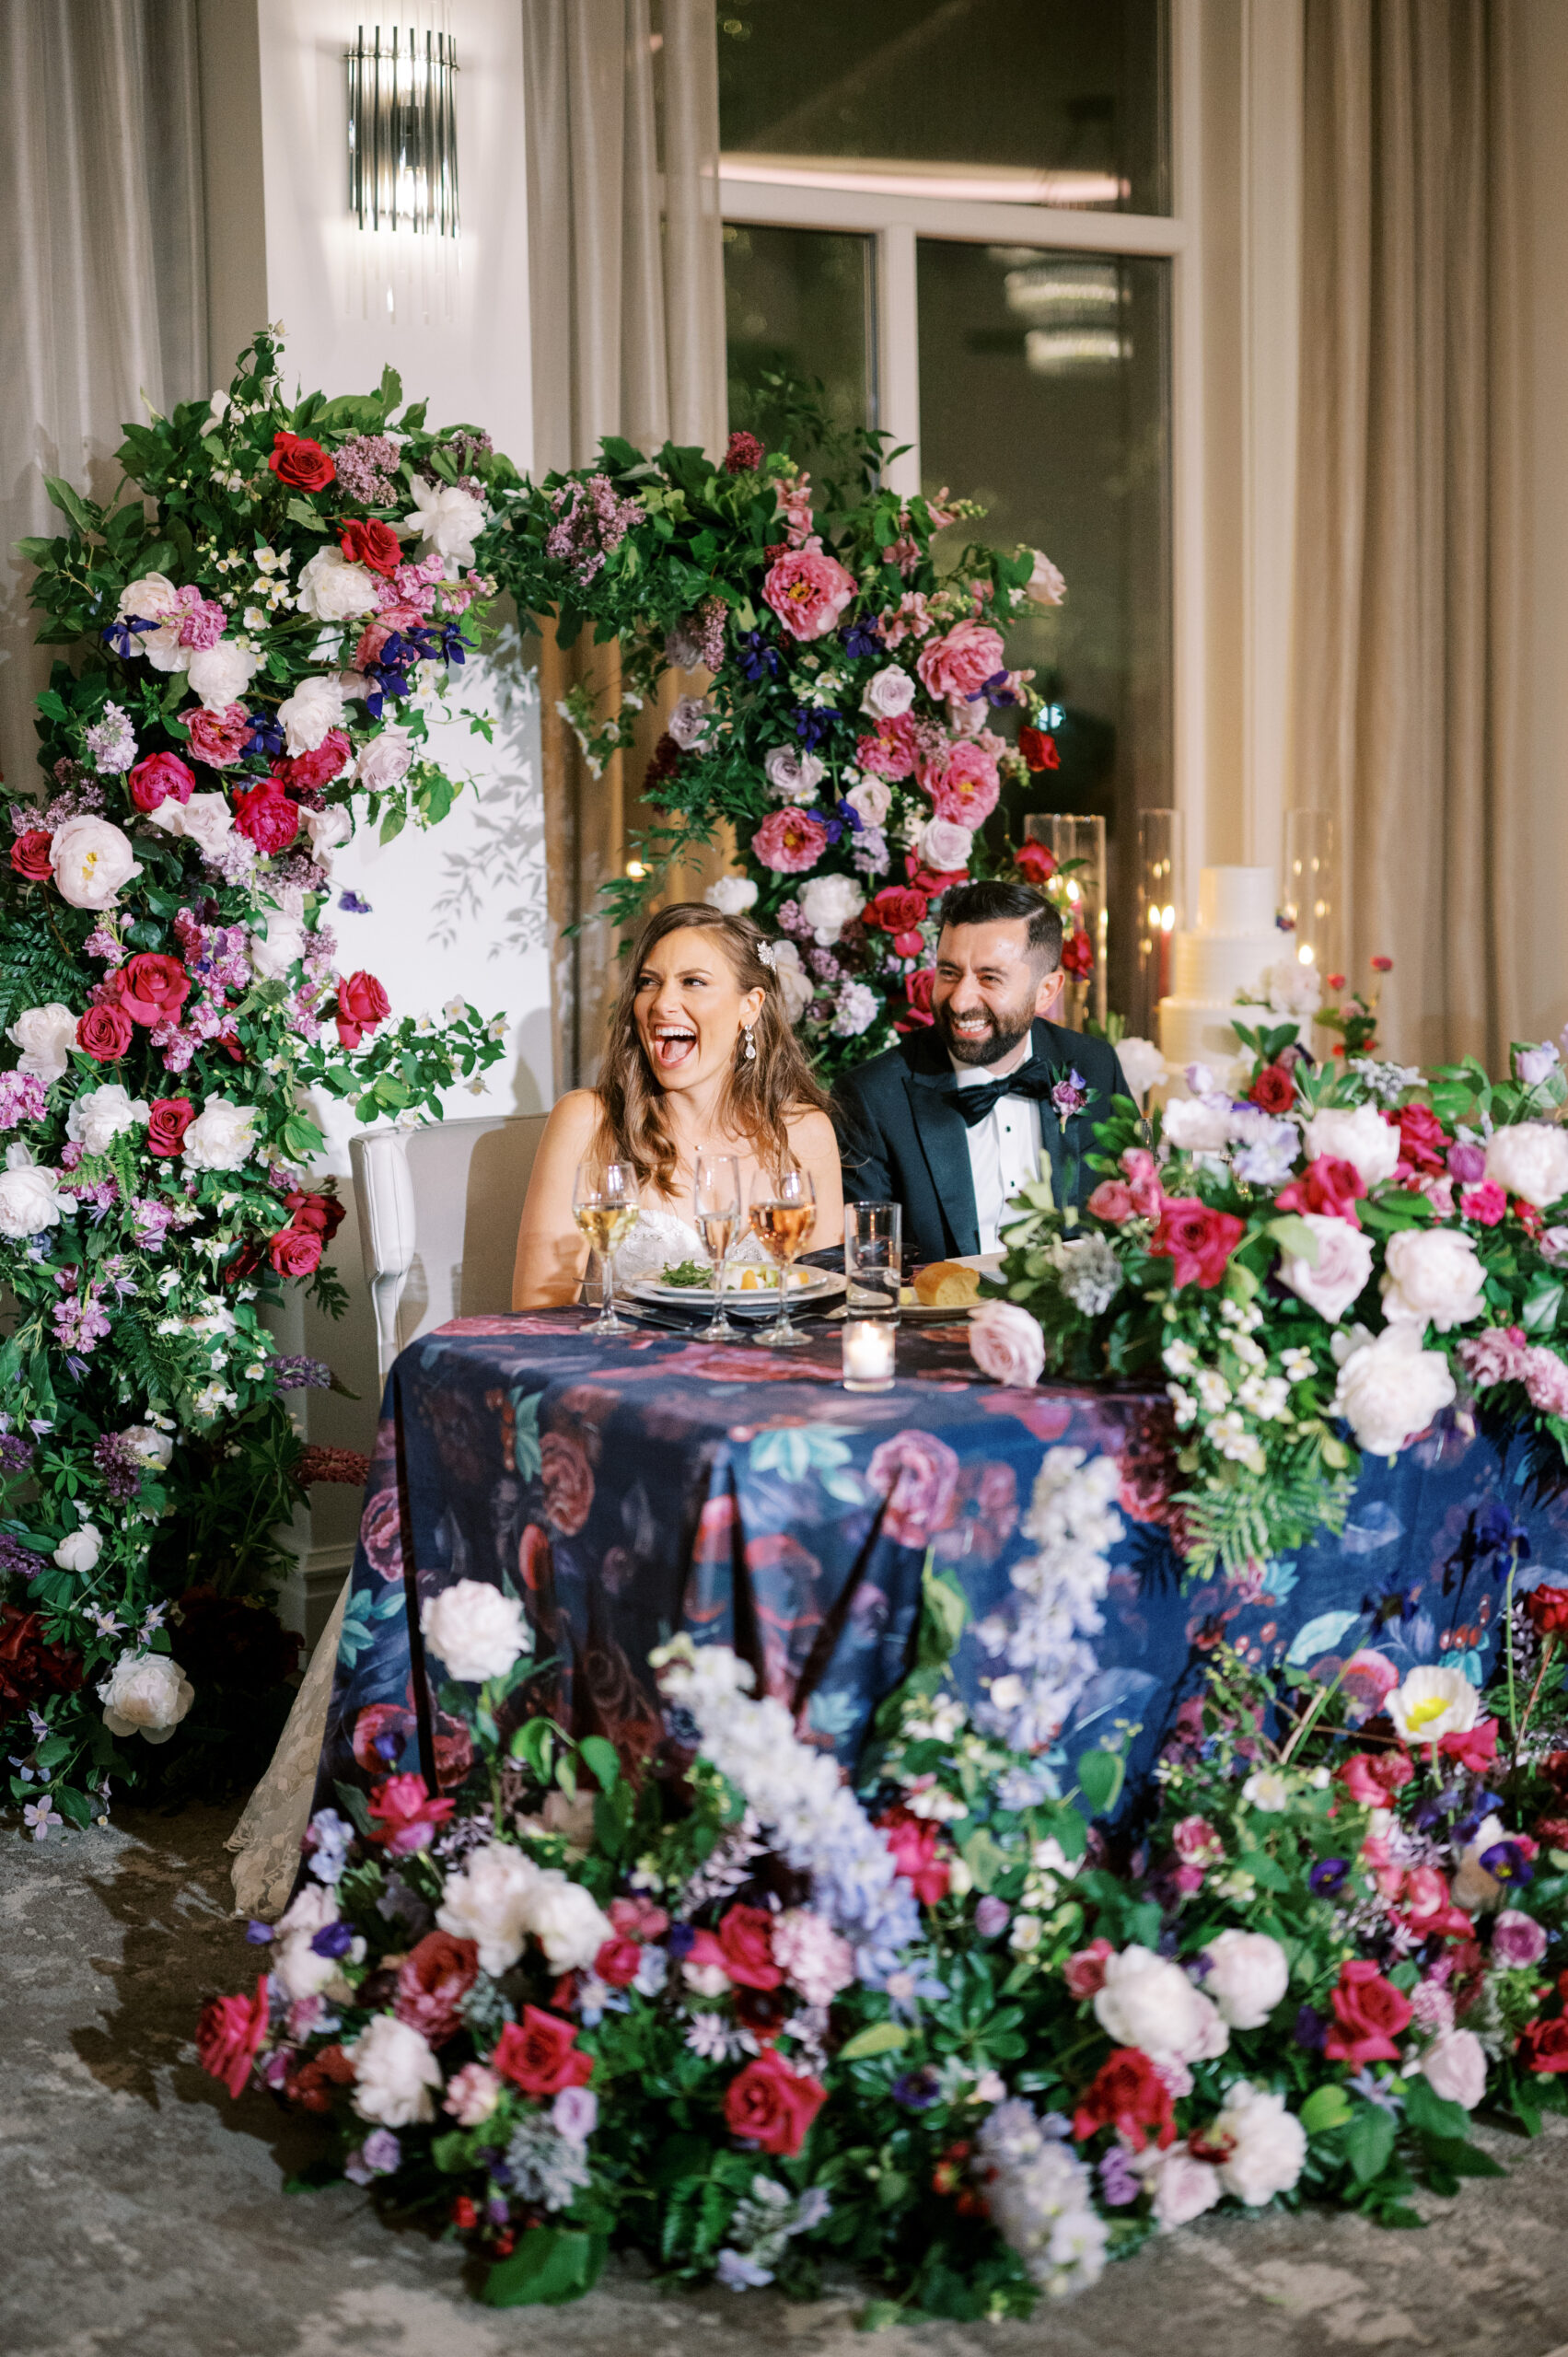 The bride and groom sit at the sweetheart table at their Chateau Grande Hotel wedding which features a purple tablecloth and an abundance of pink and purple flowers on the table and behind the couple.